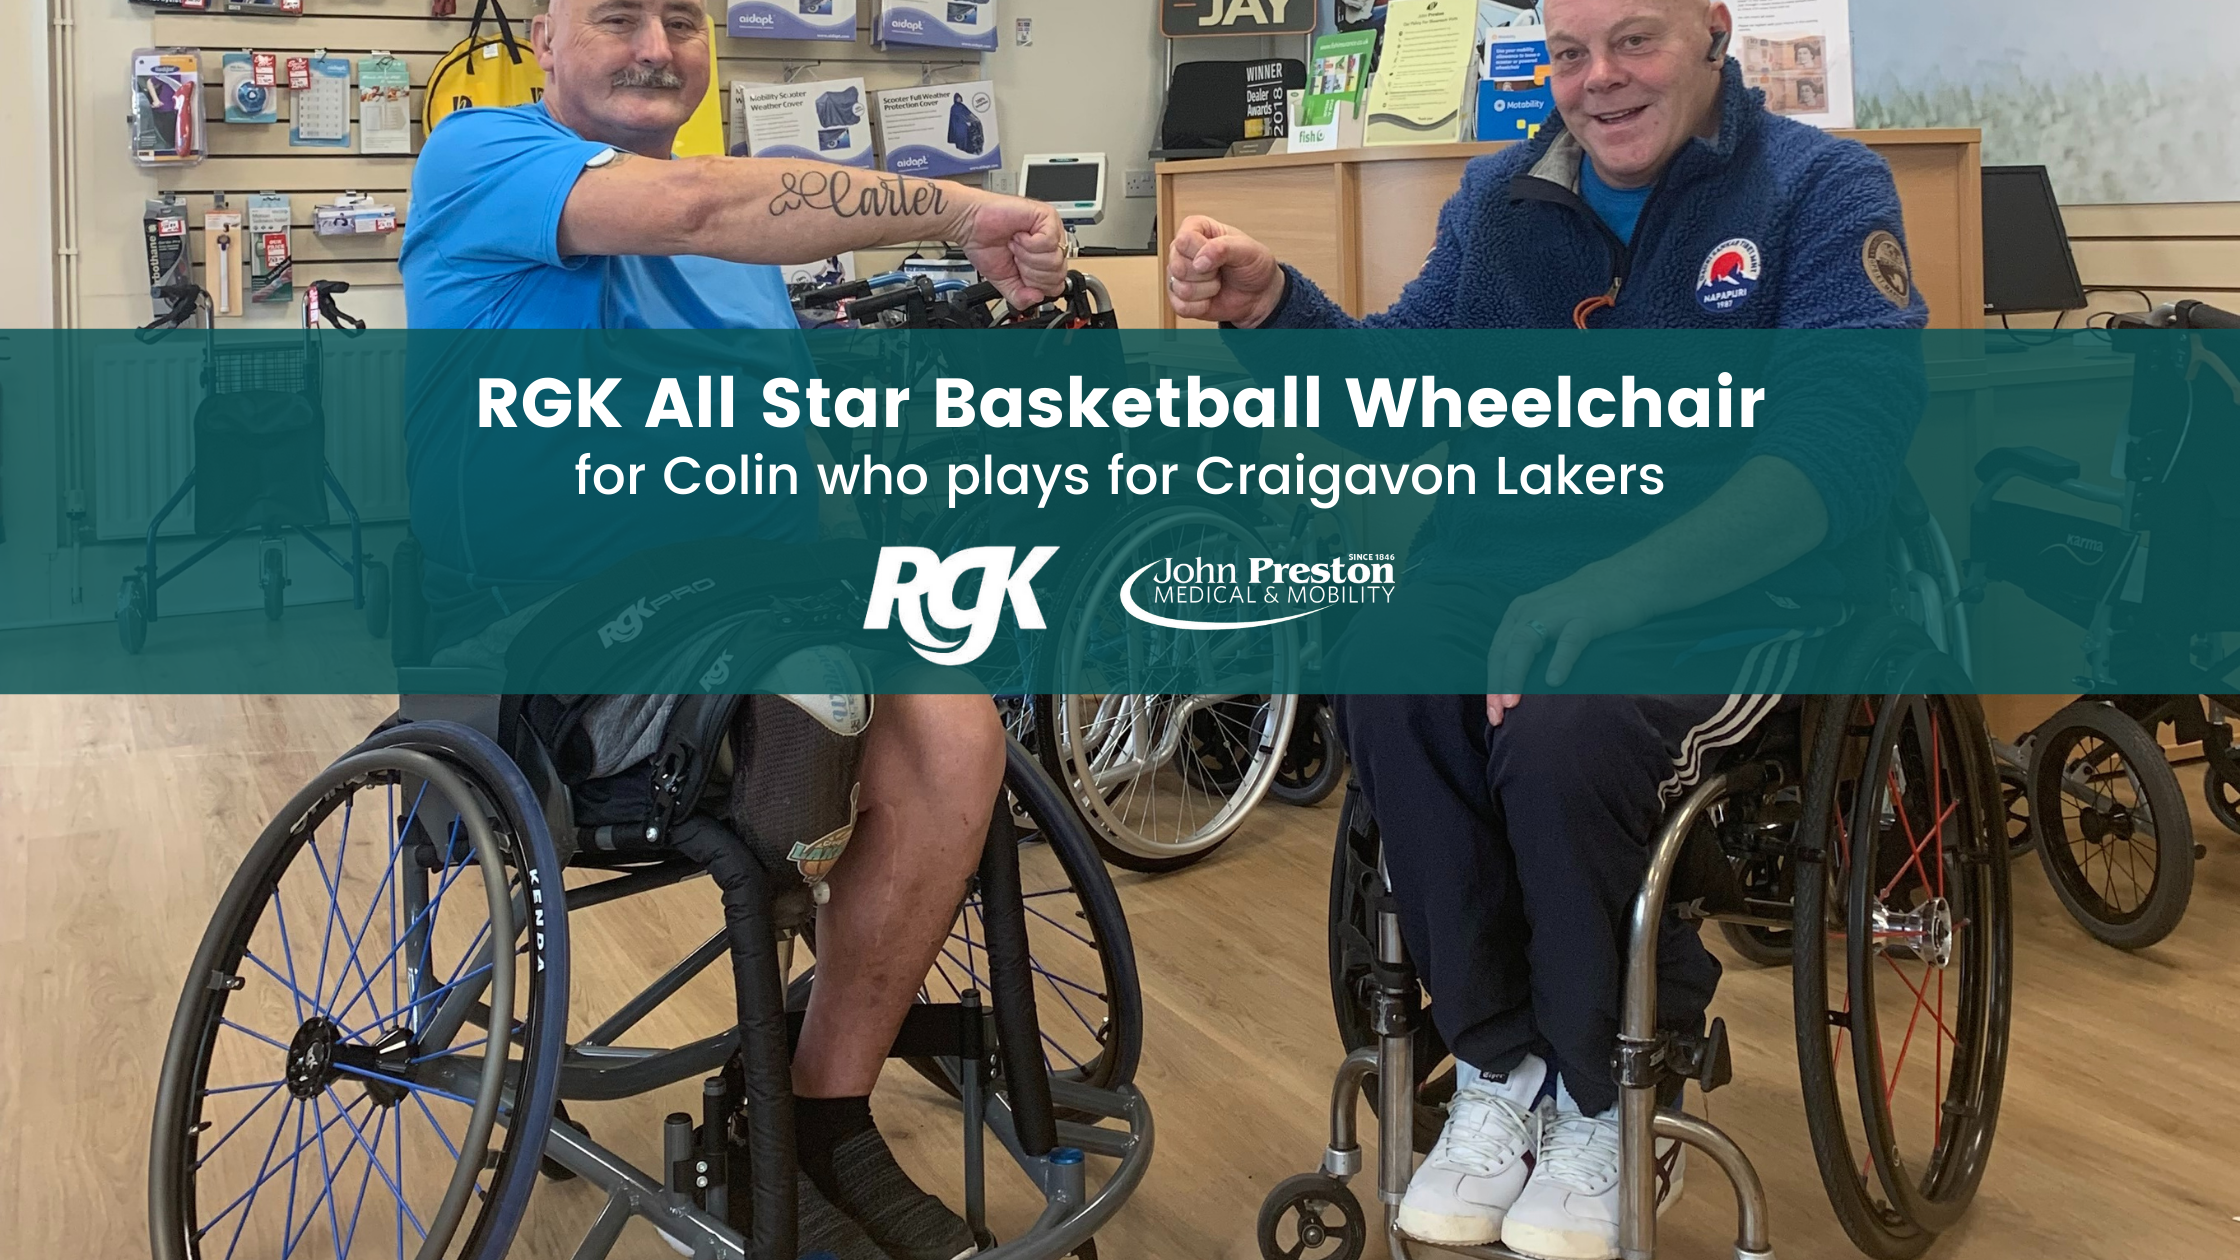 RGK All Star Basketball Wheelchair for Colin from Craigavon Lakers